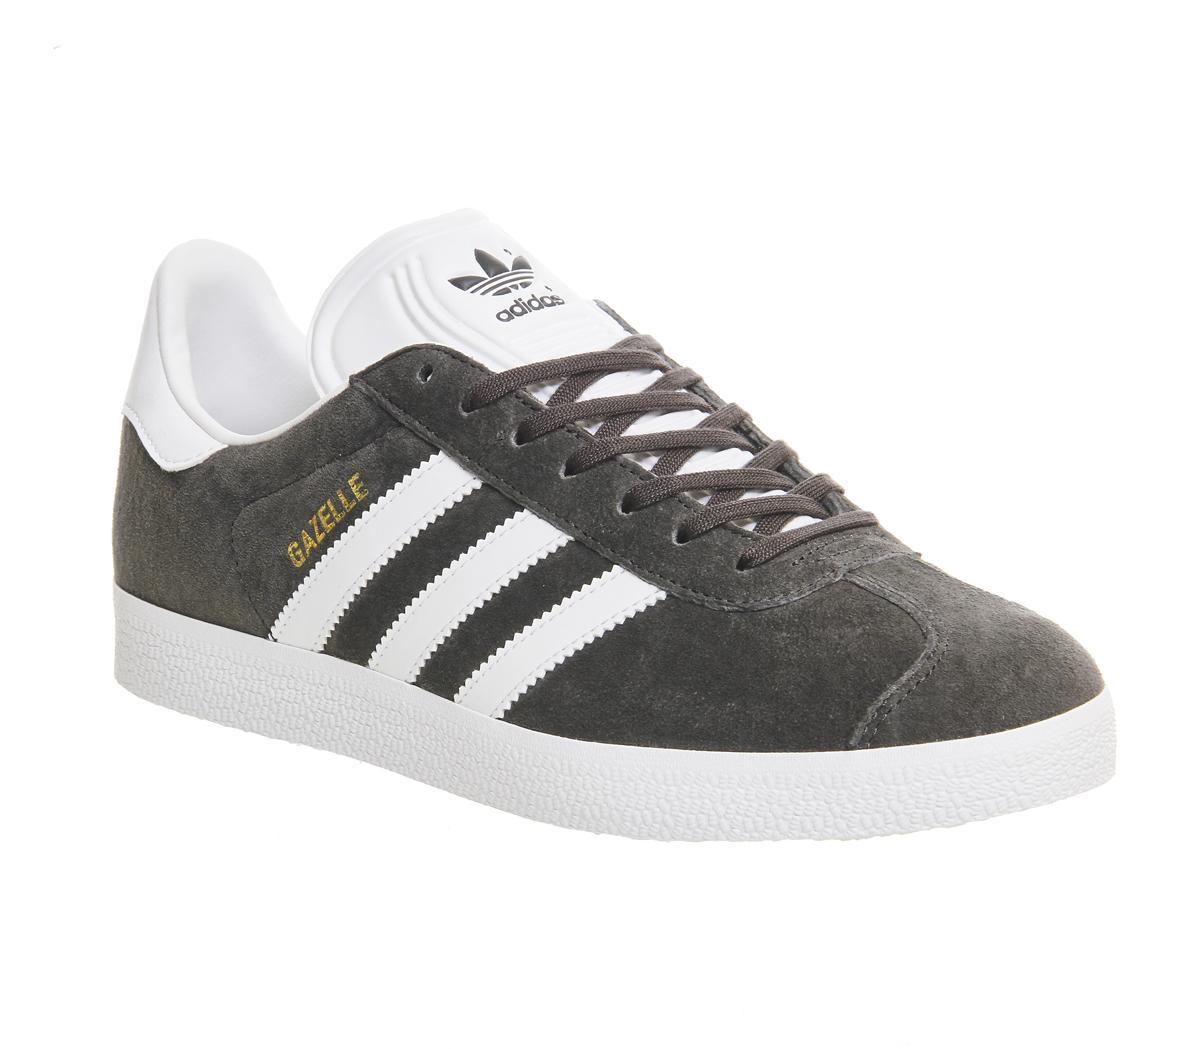 adidas Gazelle Dgh Solid Grey White Gold Met - His trainers